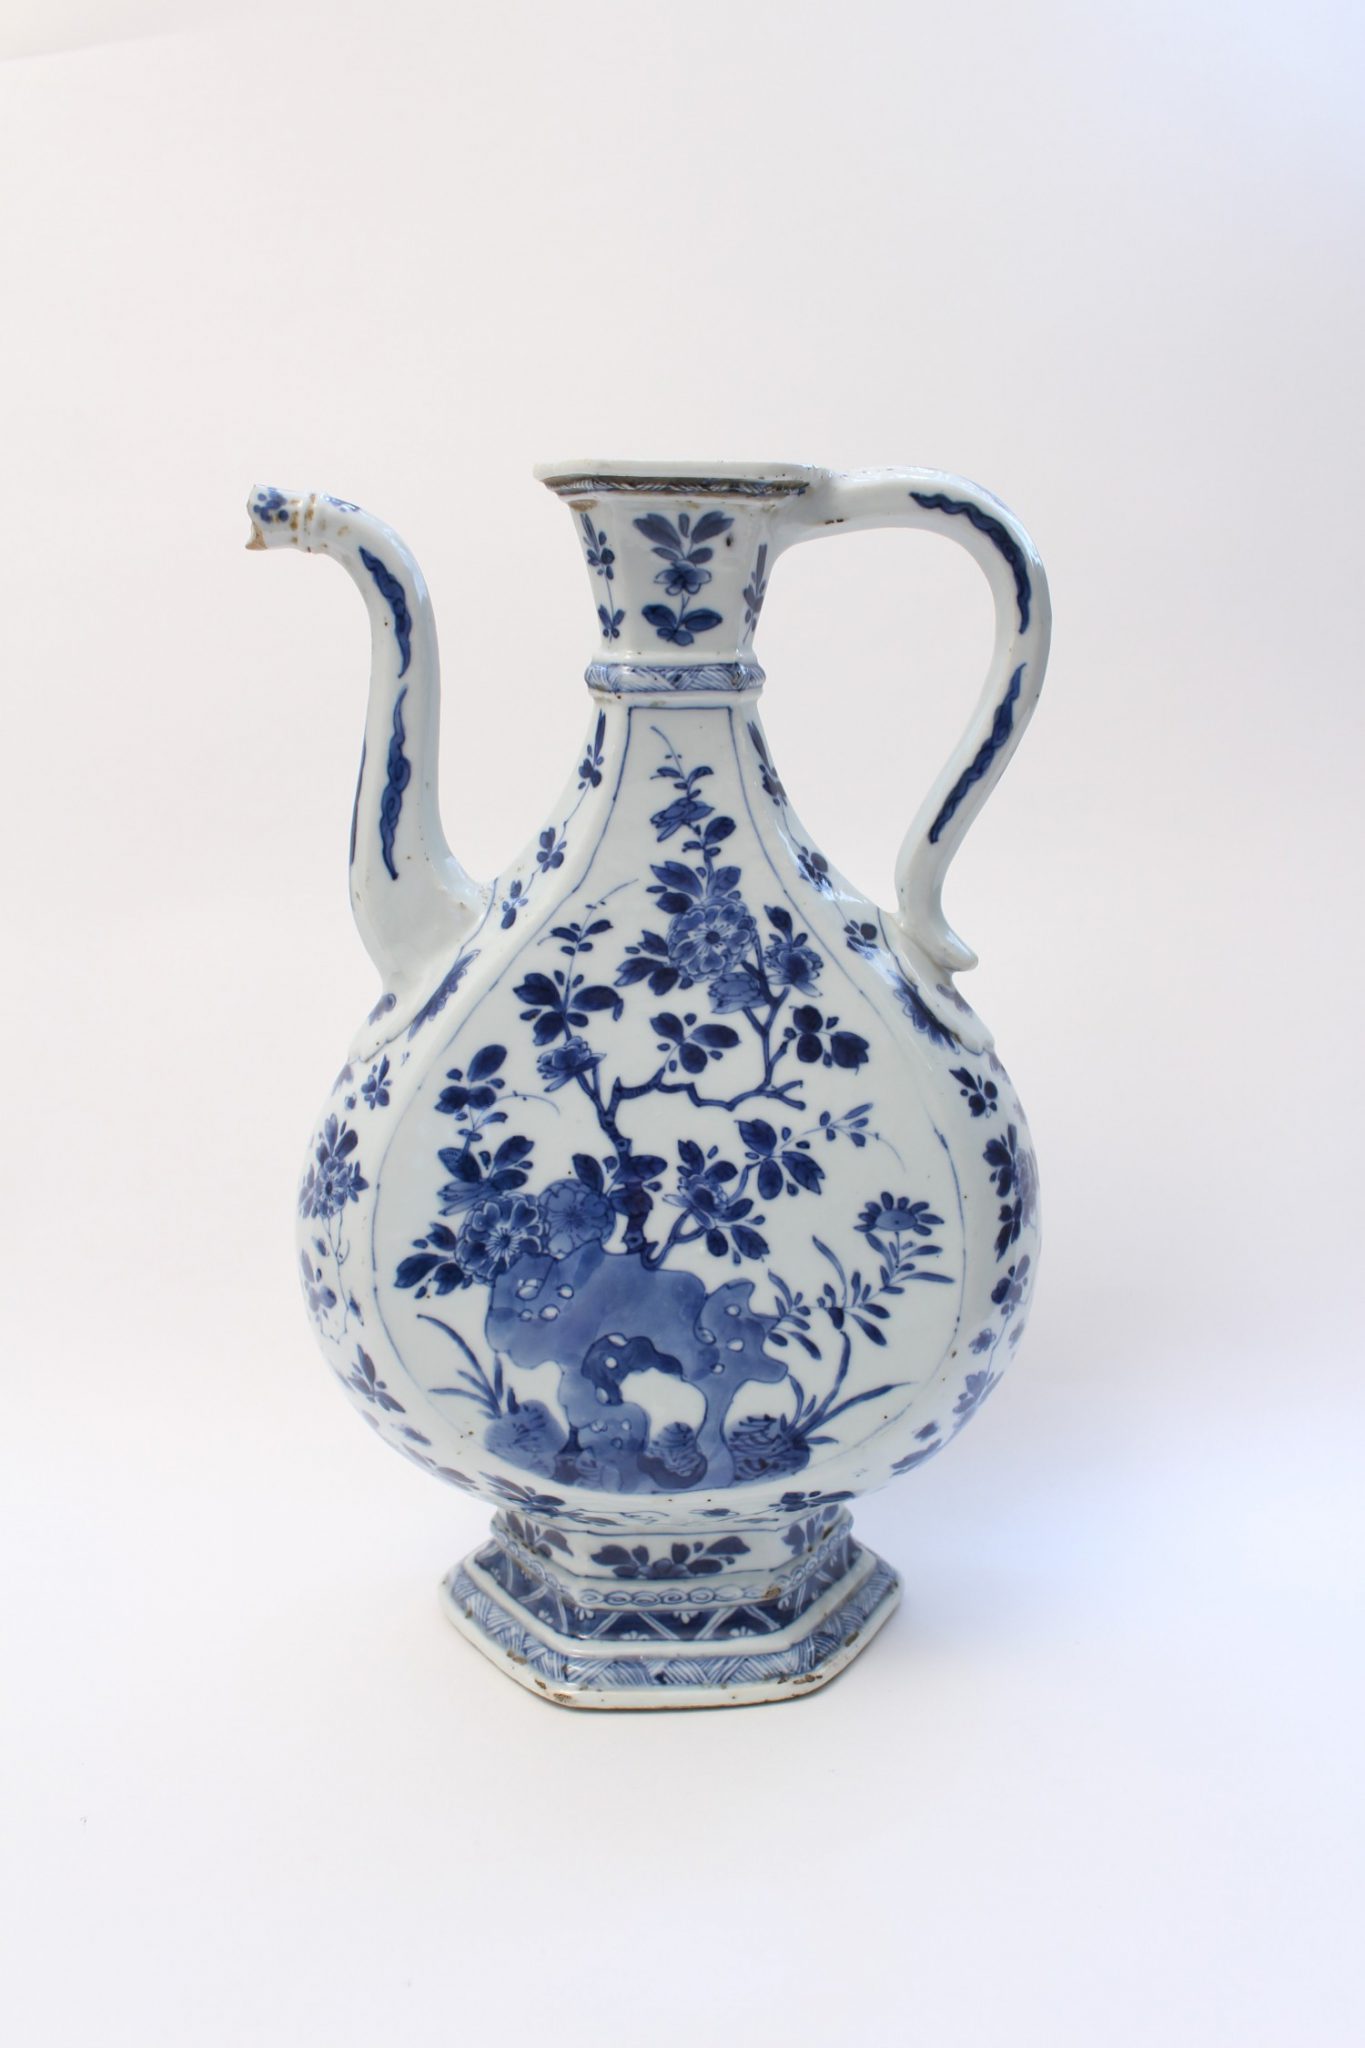 A blue and white ewer